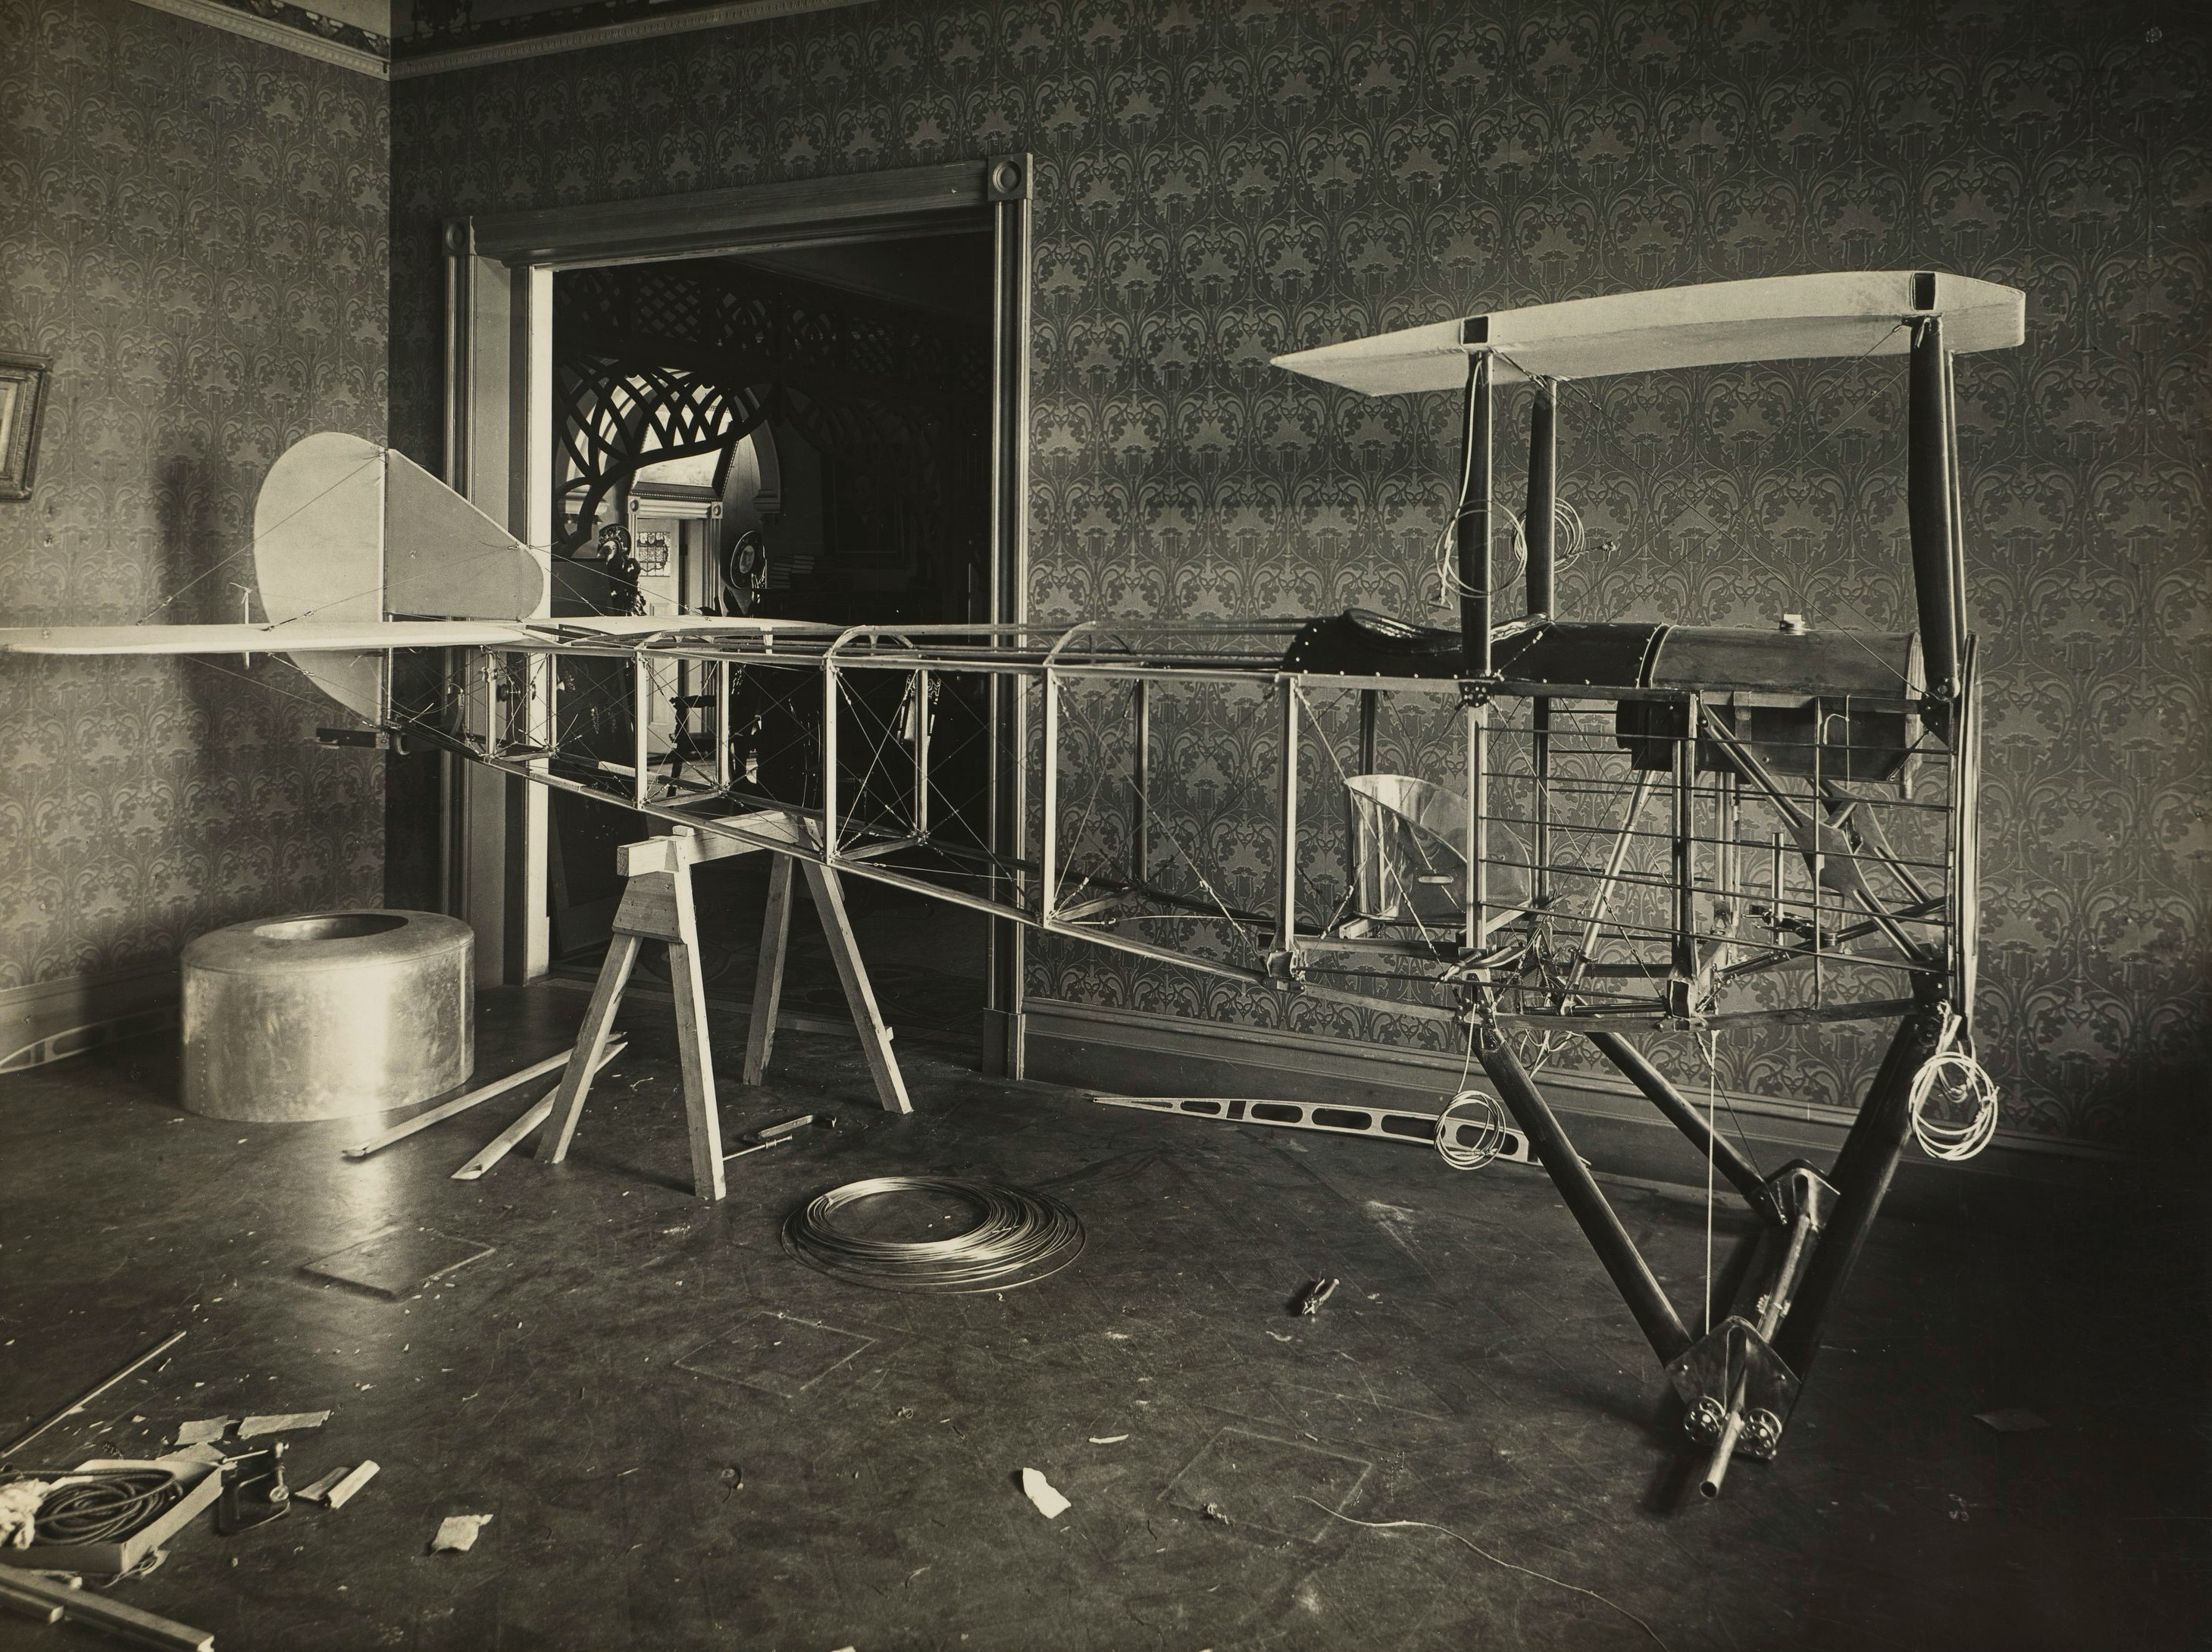 Fuselage of Basil Watson's Partially Constructed Biplane in the Family Home, Elsternwick, Victoria, 1916